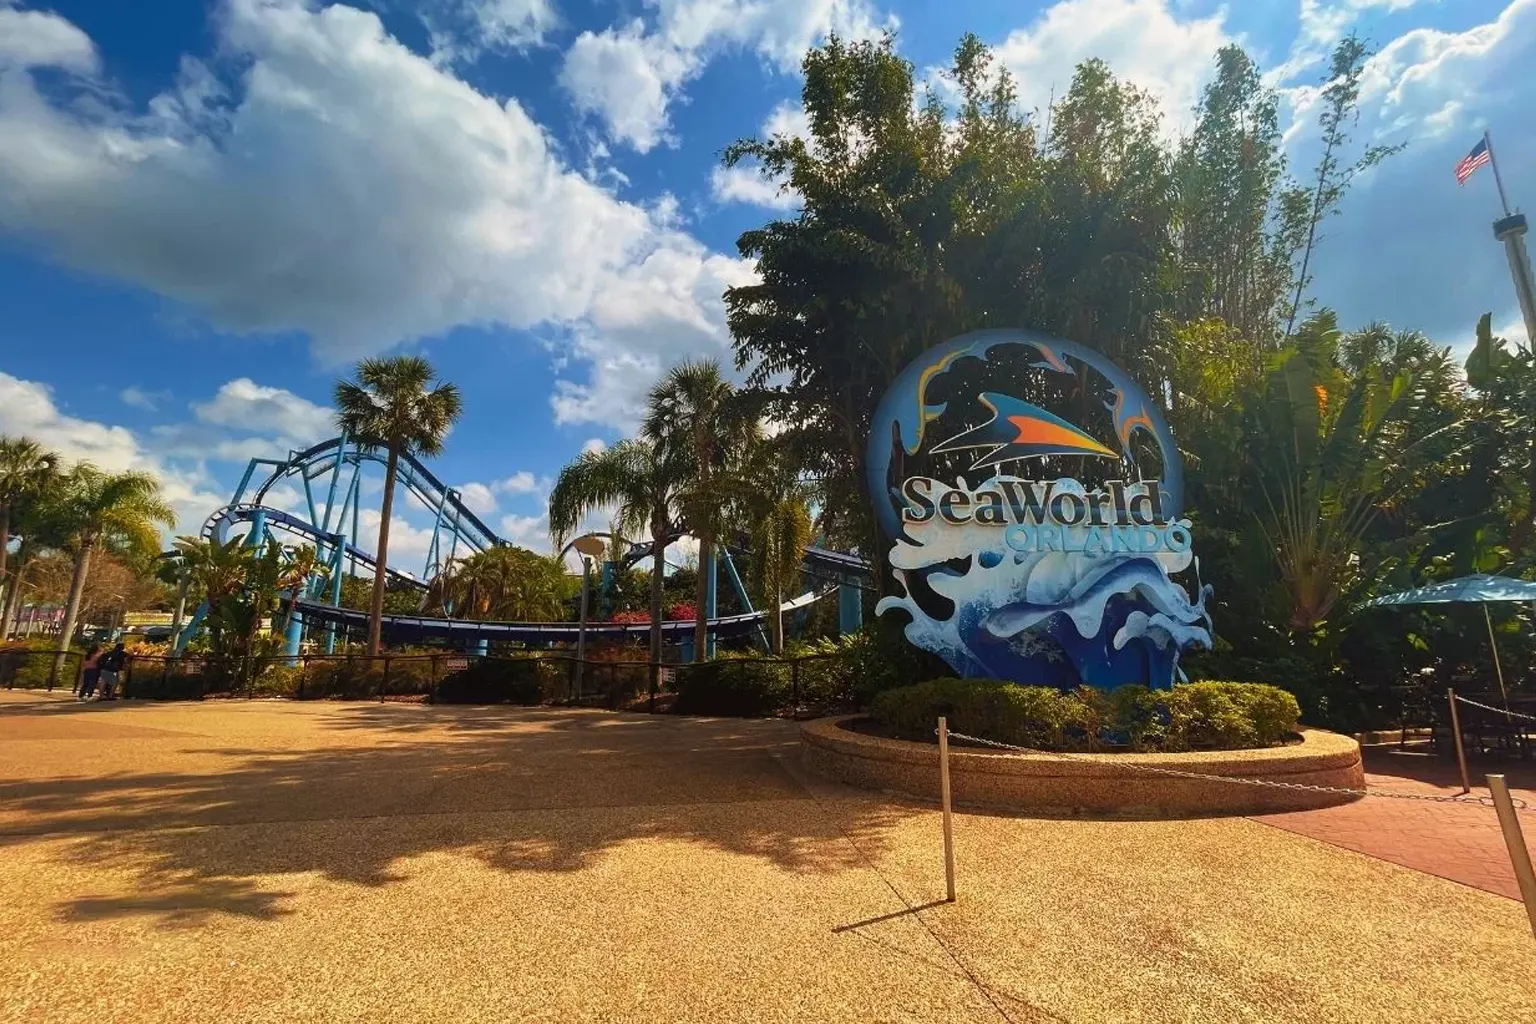 10. Experience Affordable Thrills at SeaWorld Orlando